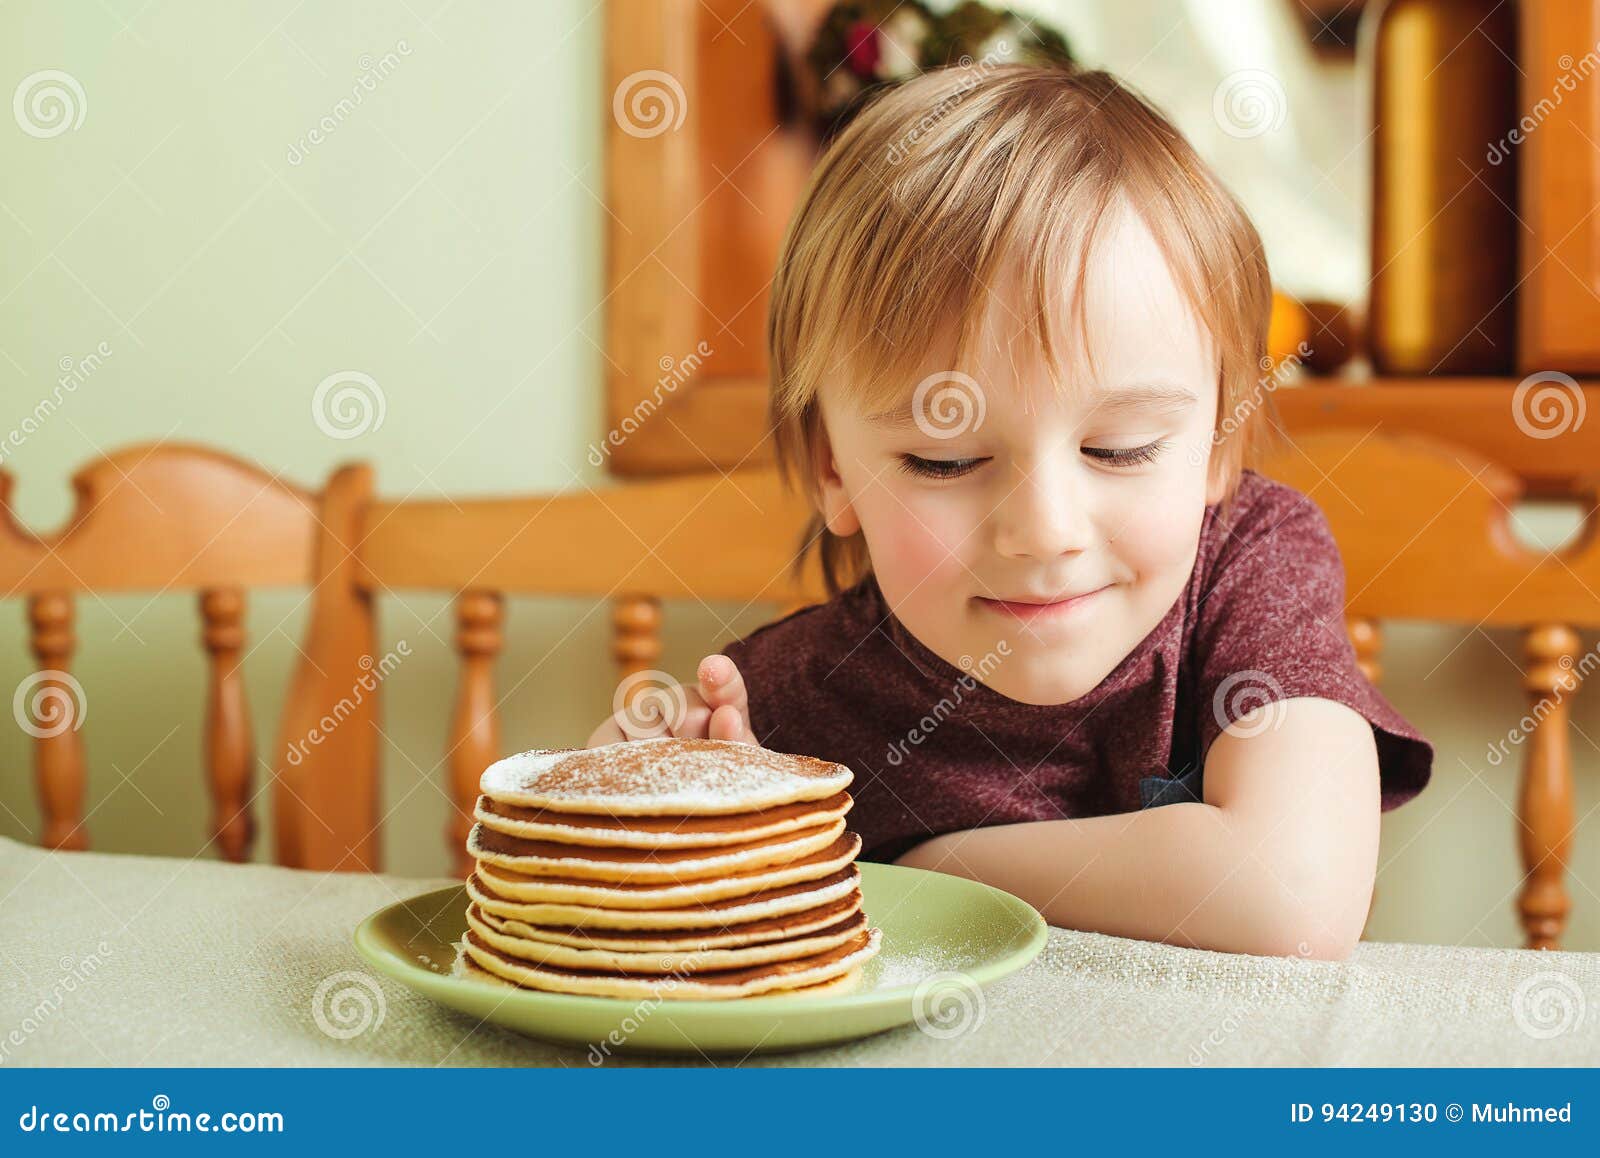 Cute Little Boy Eating a Stack of Pancakes in the Kitchen. Stock Photo ...